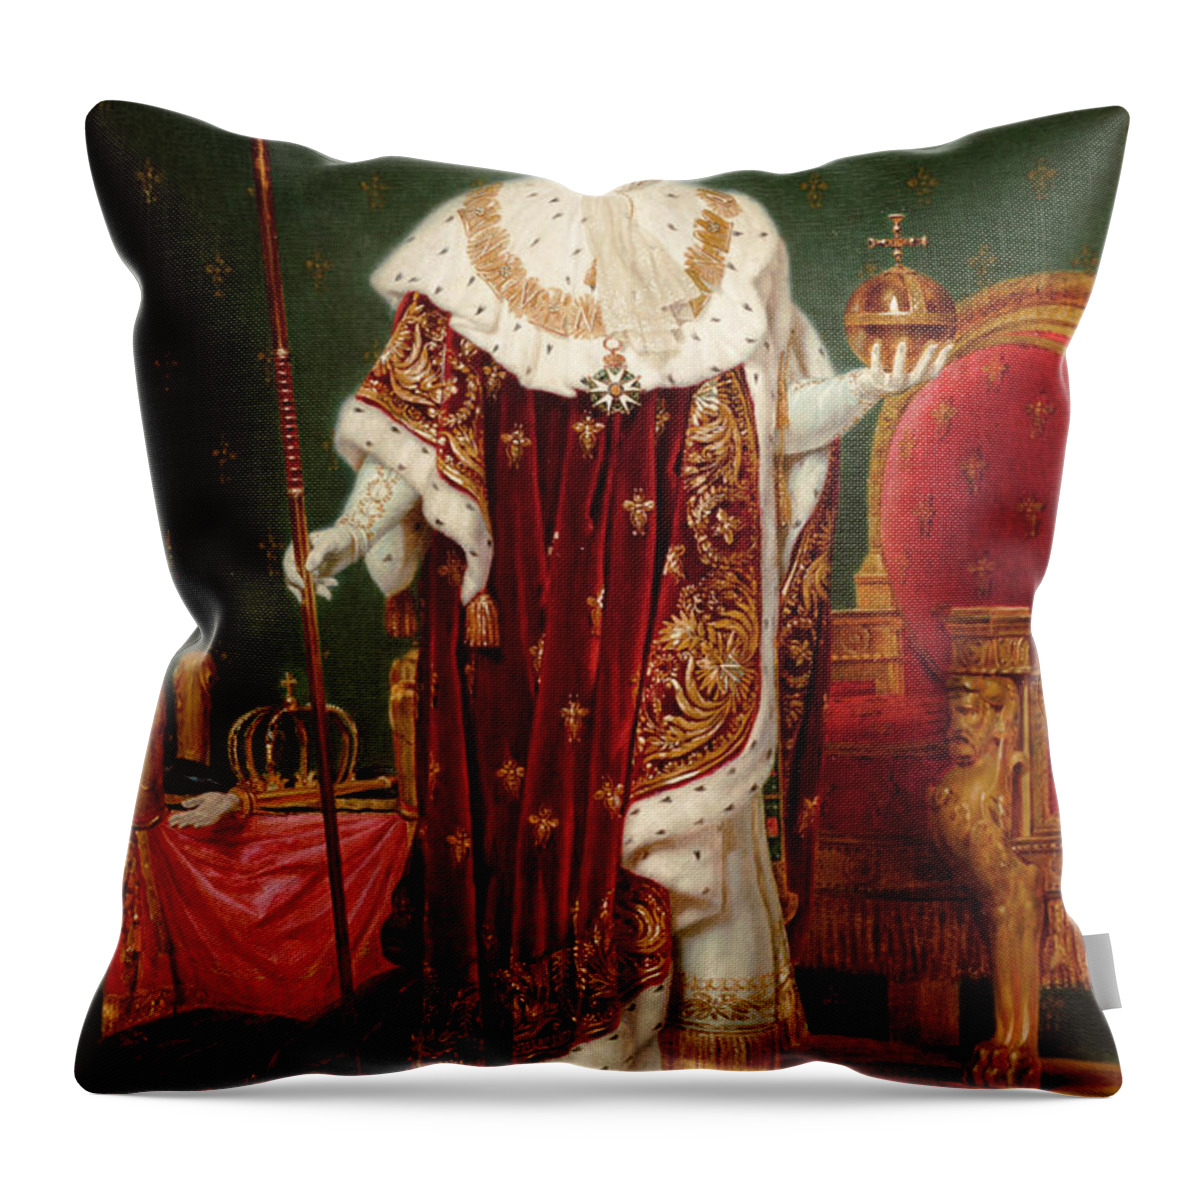 Emperor Napoleon I Throw Pillow featuring the painting Emperor Napoleon I by Jacques-Louis David